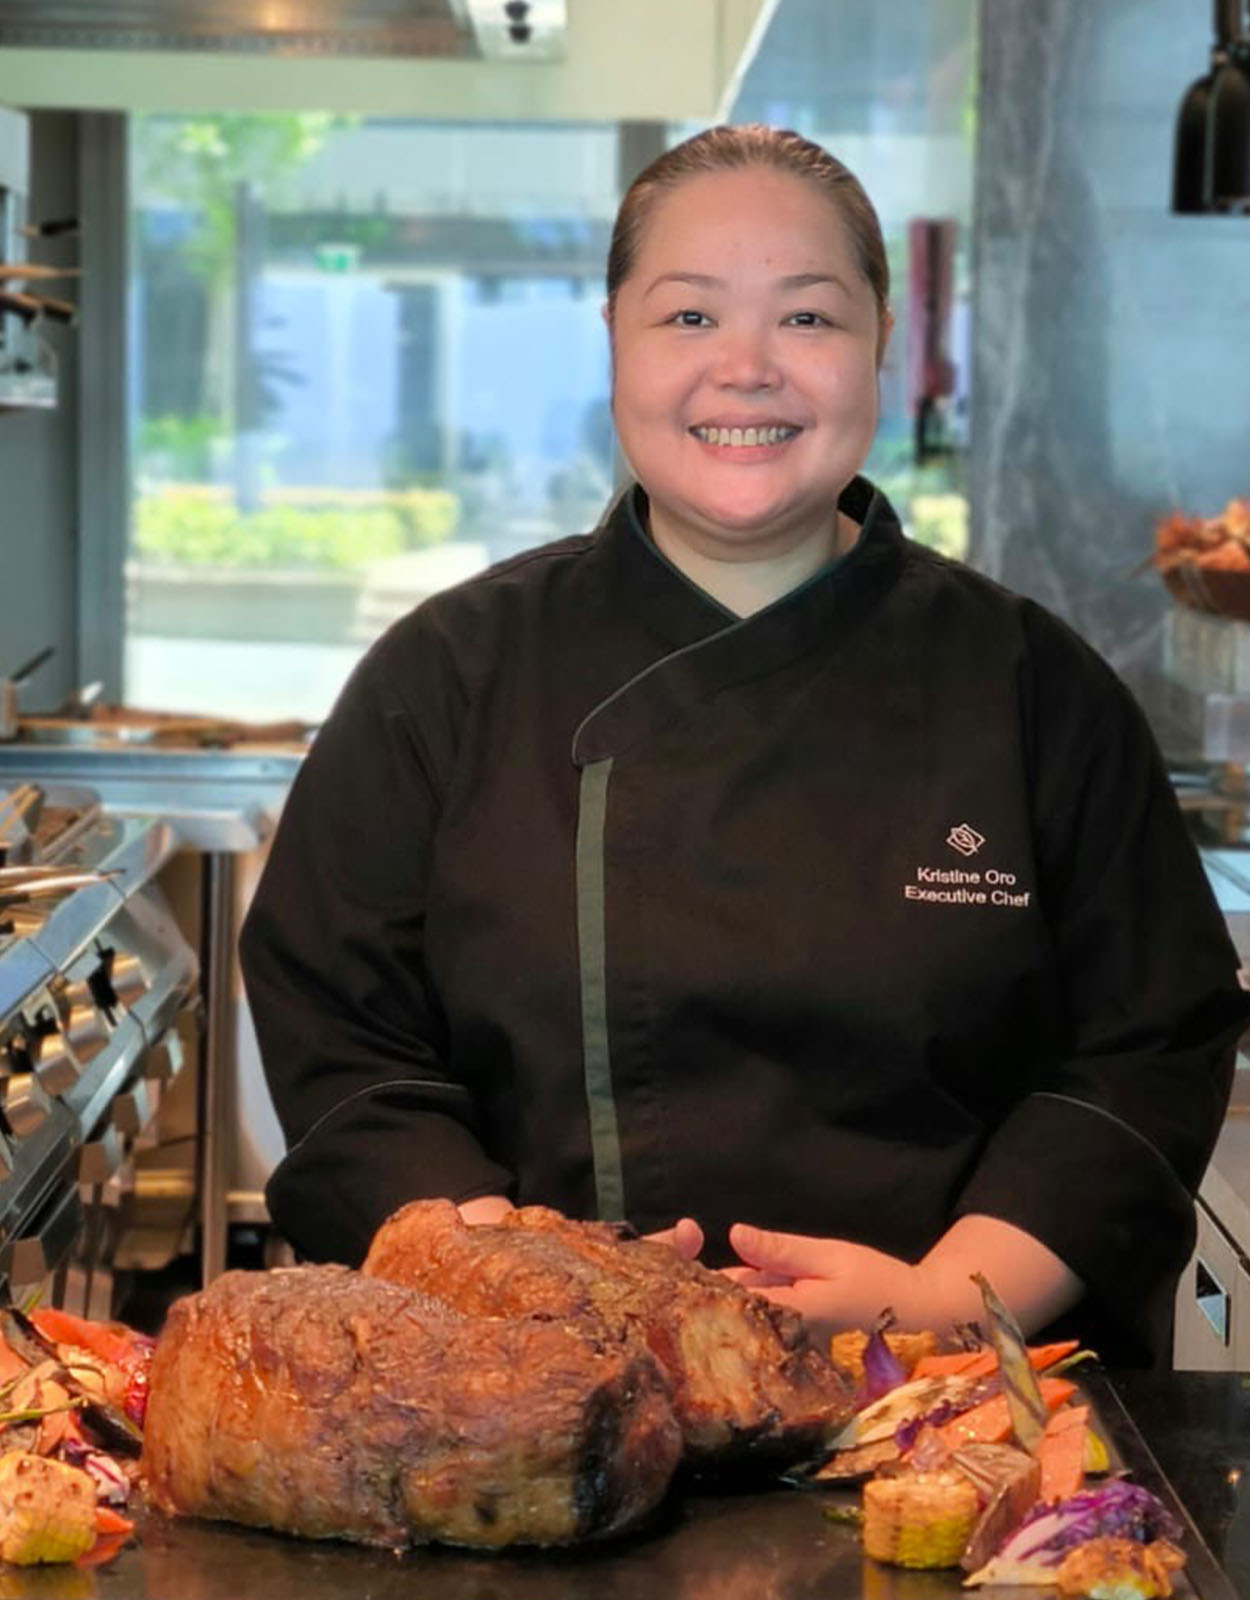 Executive Chef Kristine Oro specializes in fine dining cuisine and brings 24 years of experience in curating the dishes served in Cyan Modern Kitchen.